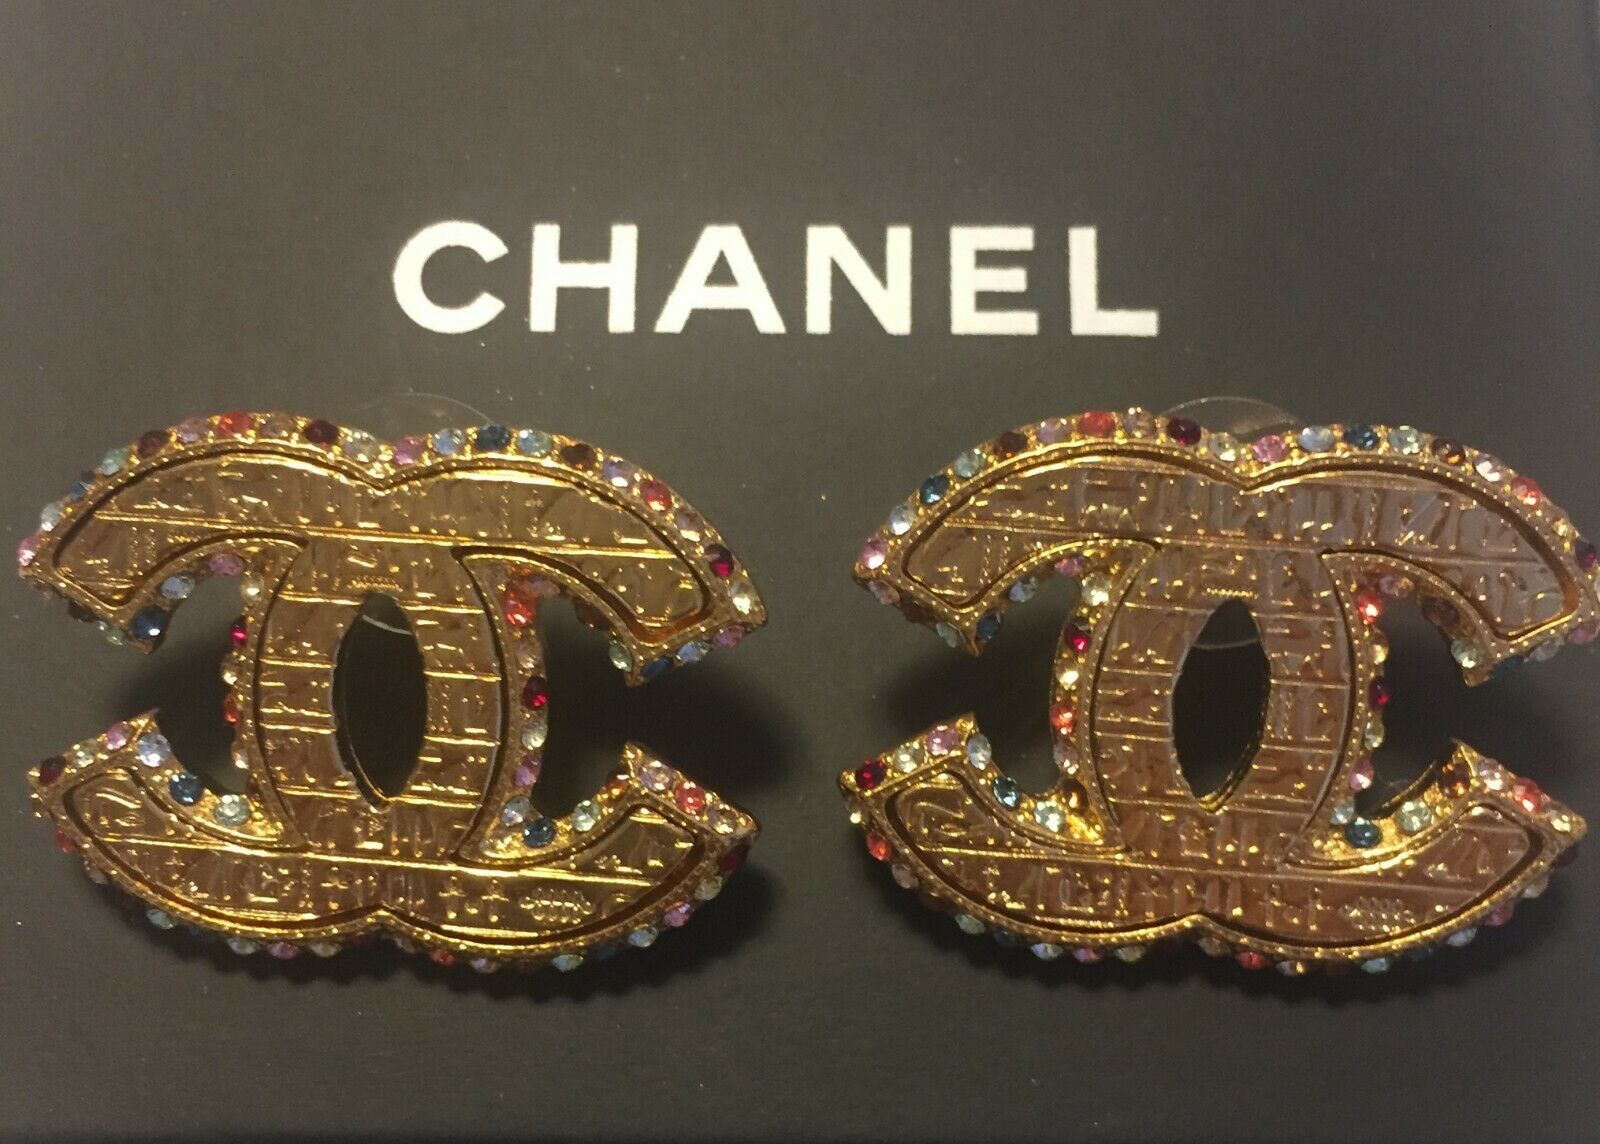 Chanel Resin and Strass Metal Earrings Gold/Transparent  Chanel pearl  earrings, Chanel earrings price, Chanel jewelry earrings